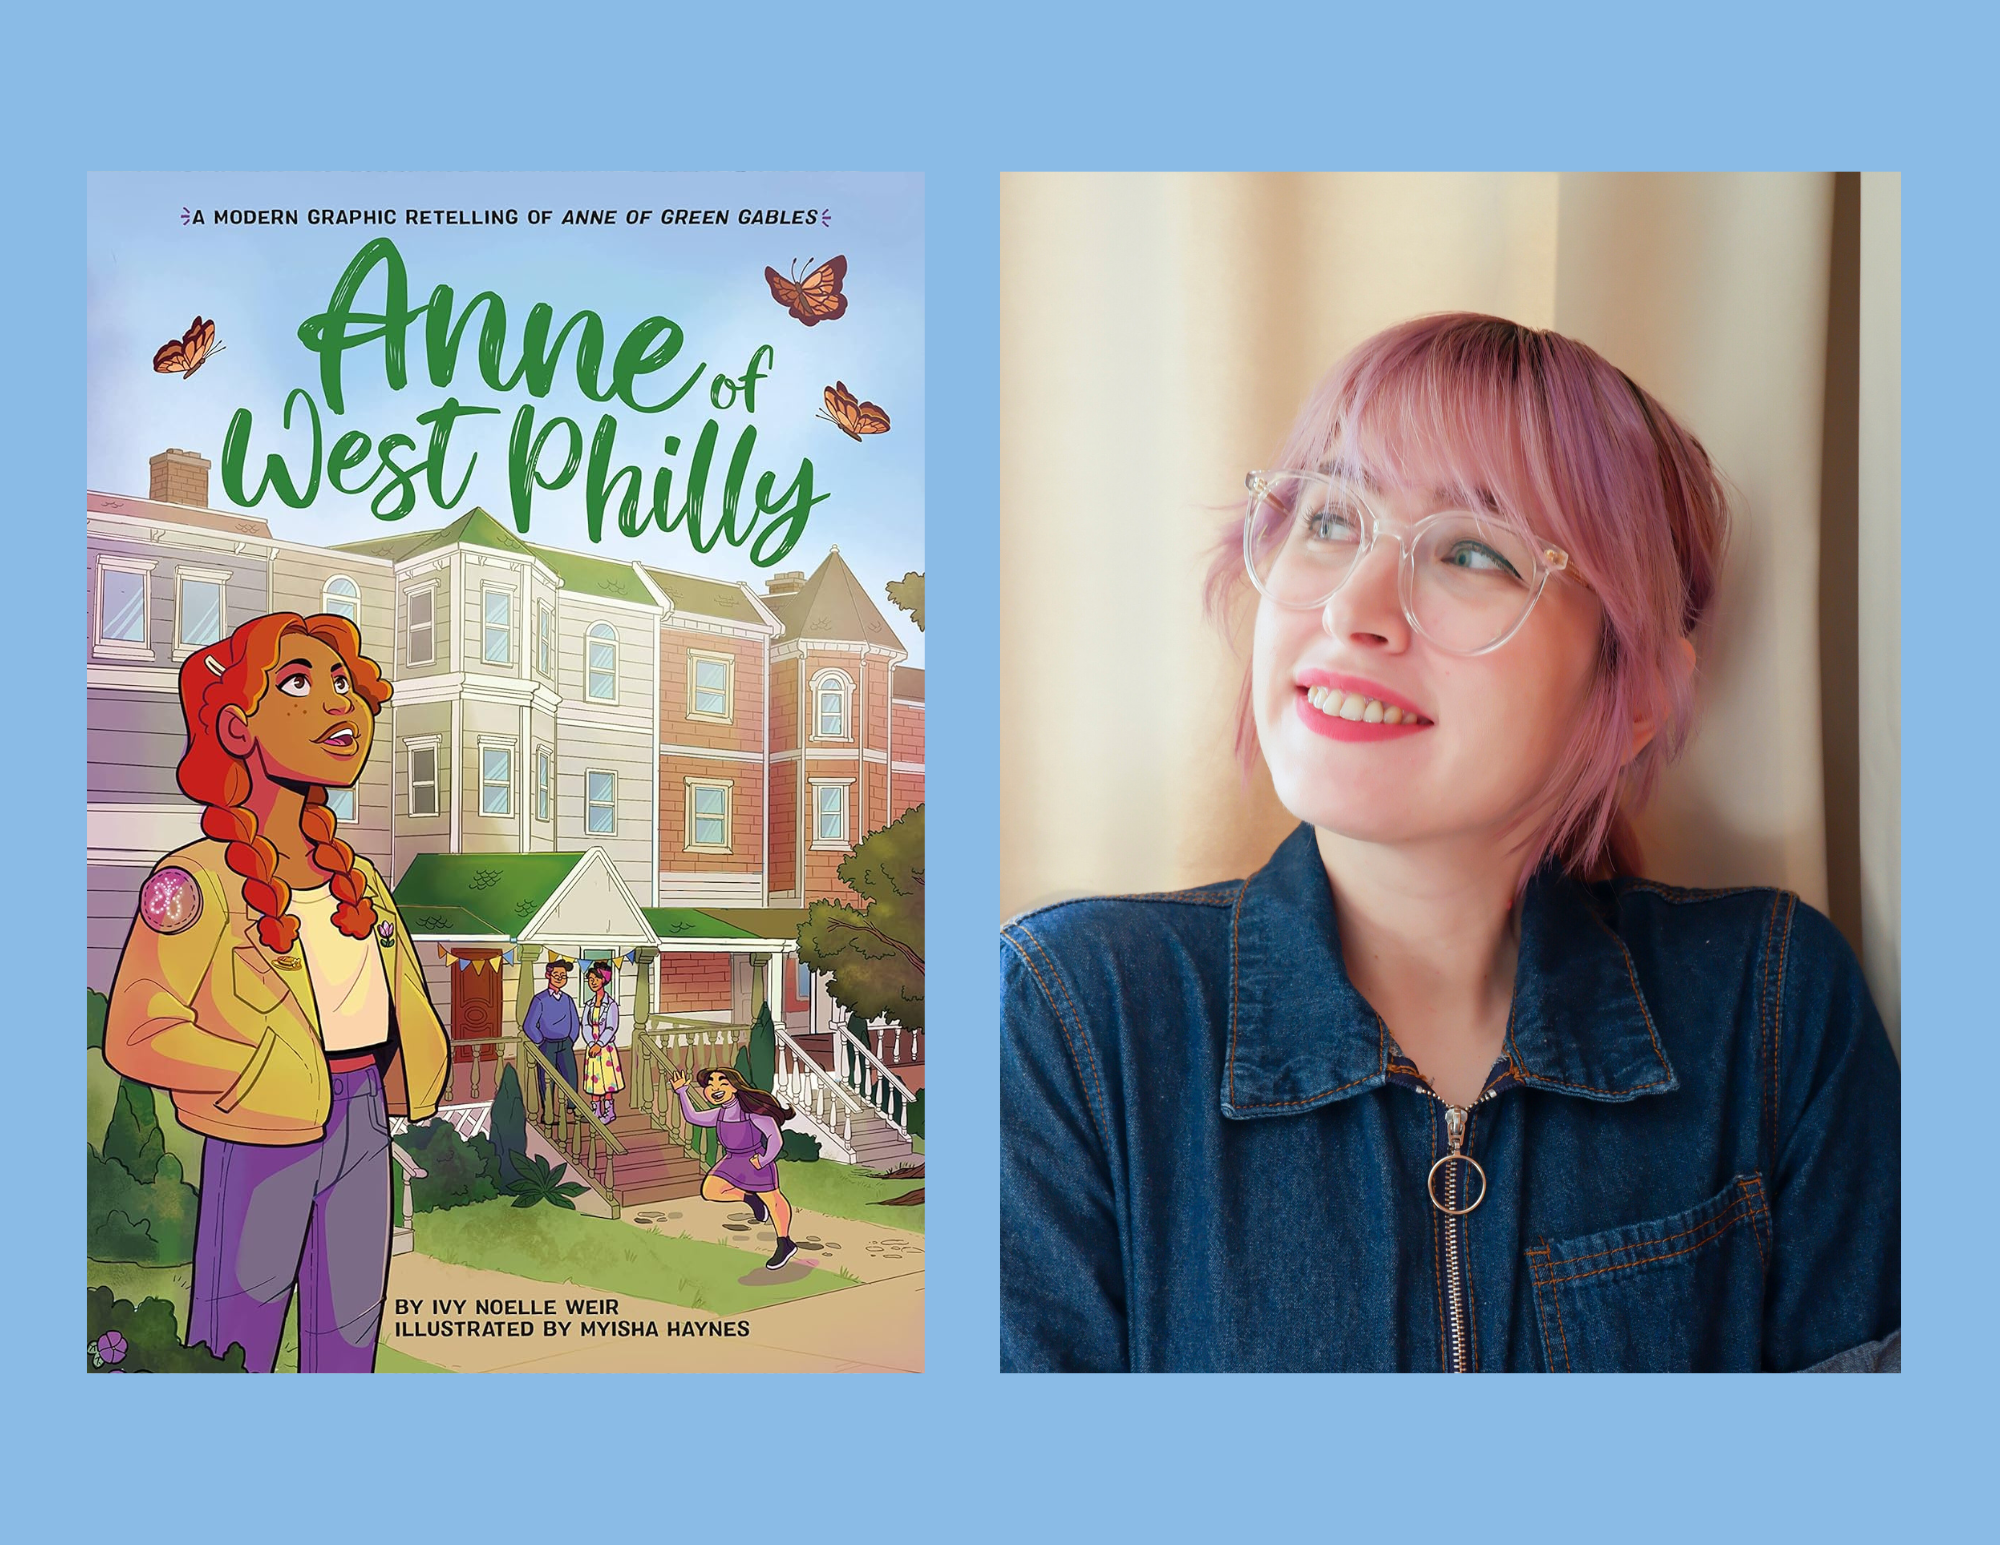 Anne of West Philly and the World of Writing for Comic Books: An Interview with Ivy Noelle Weir